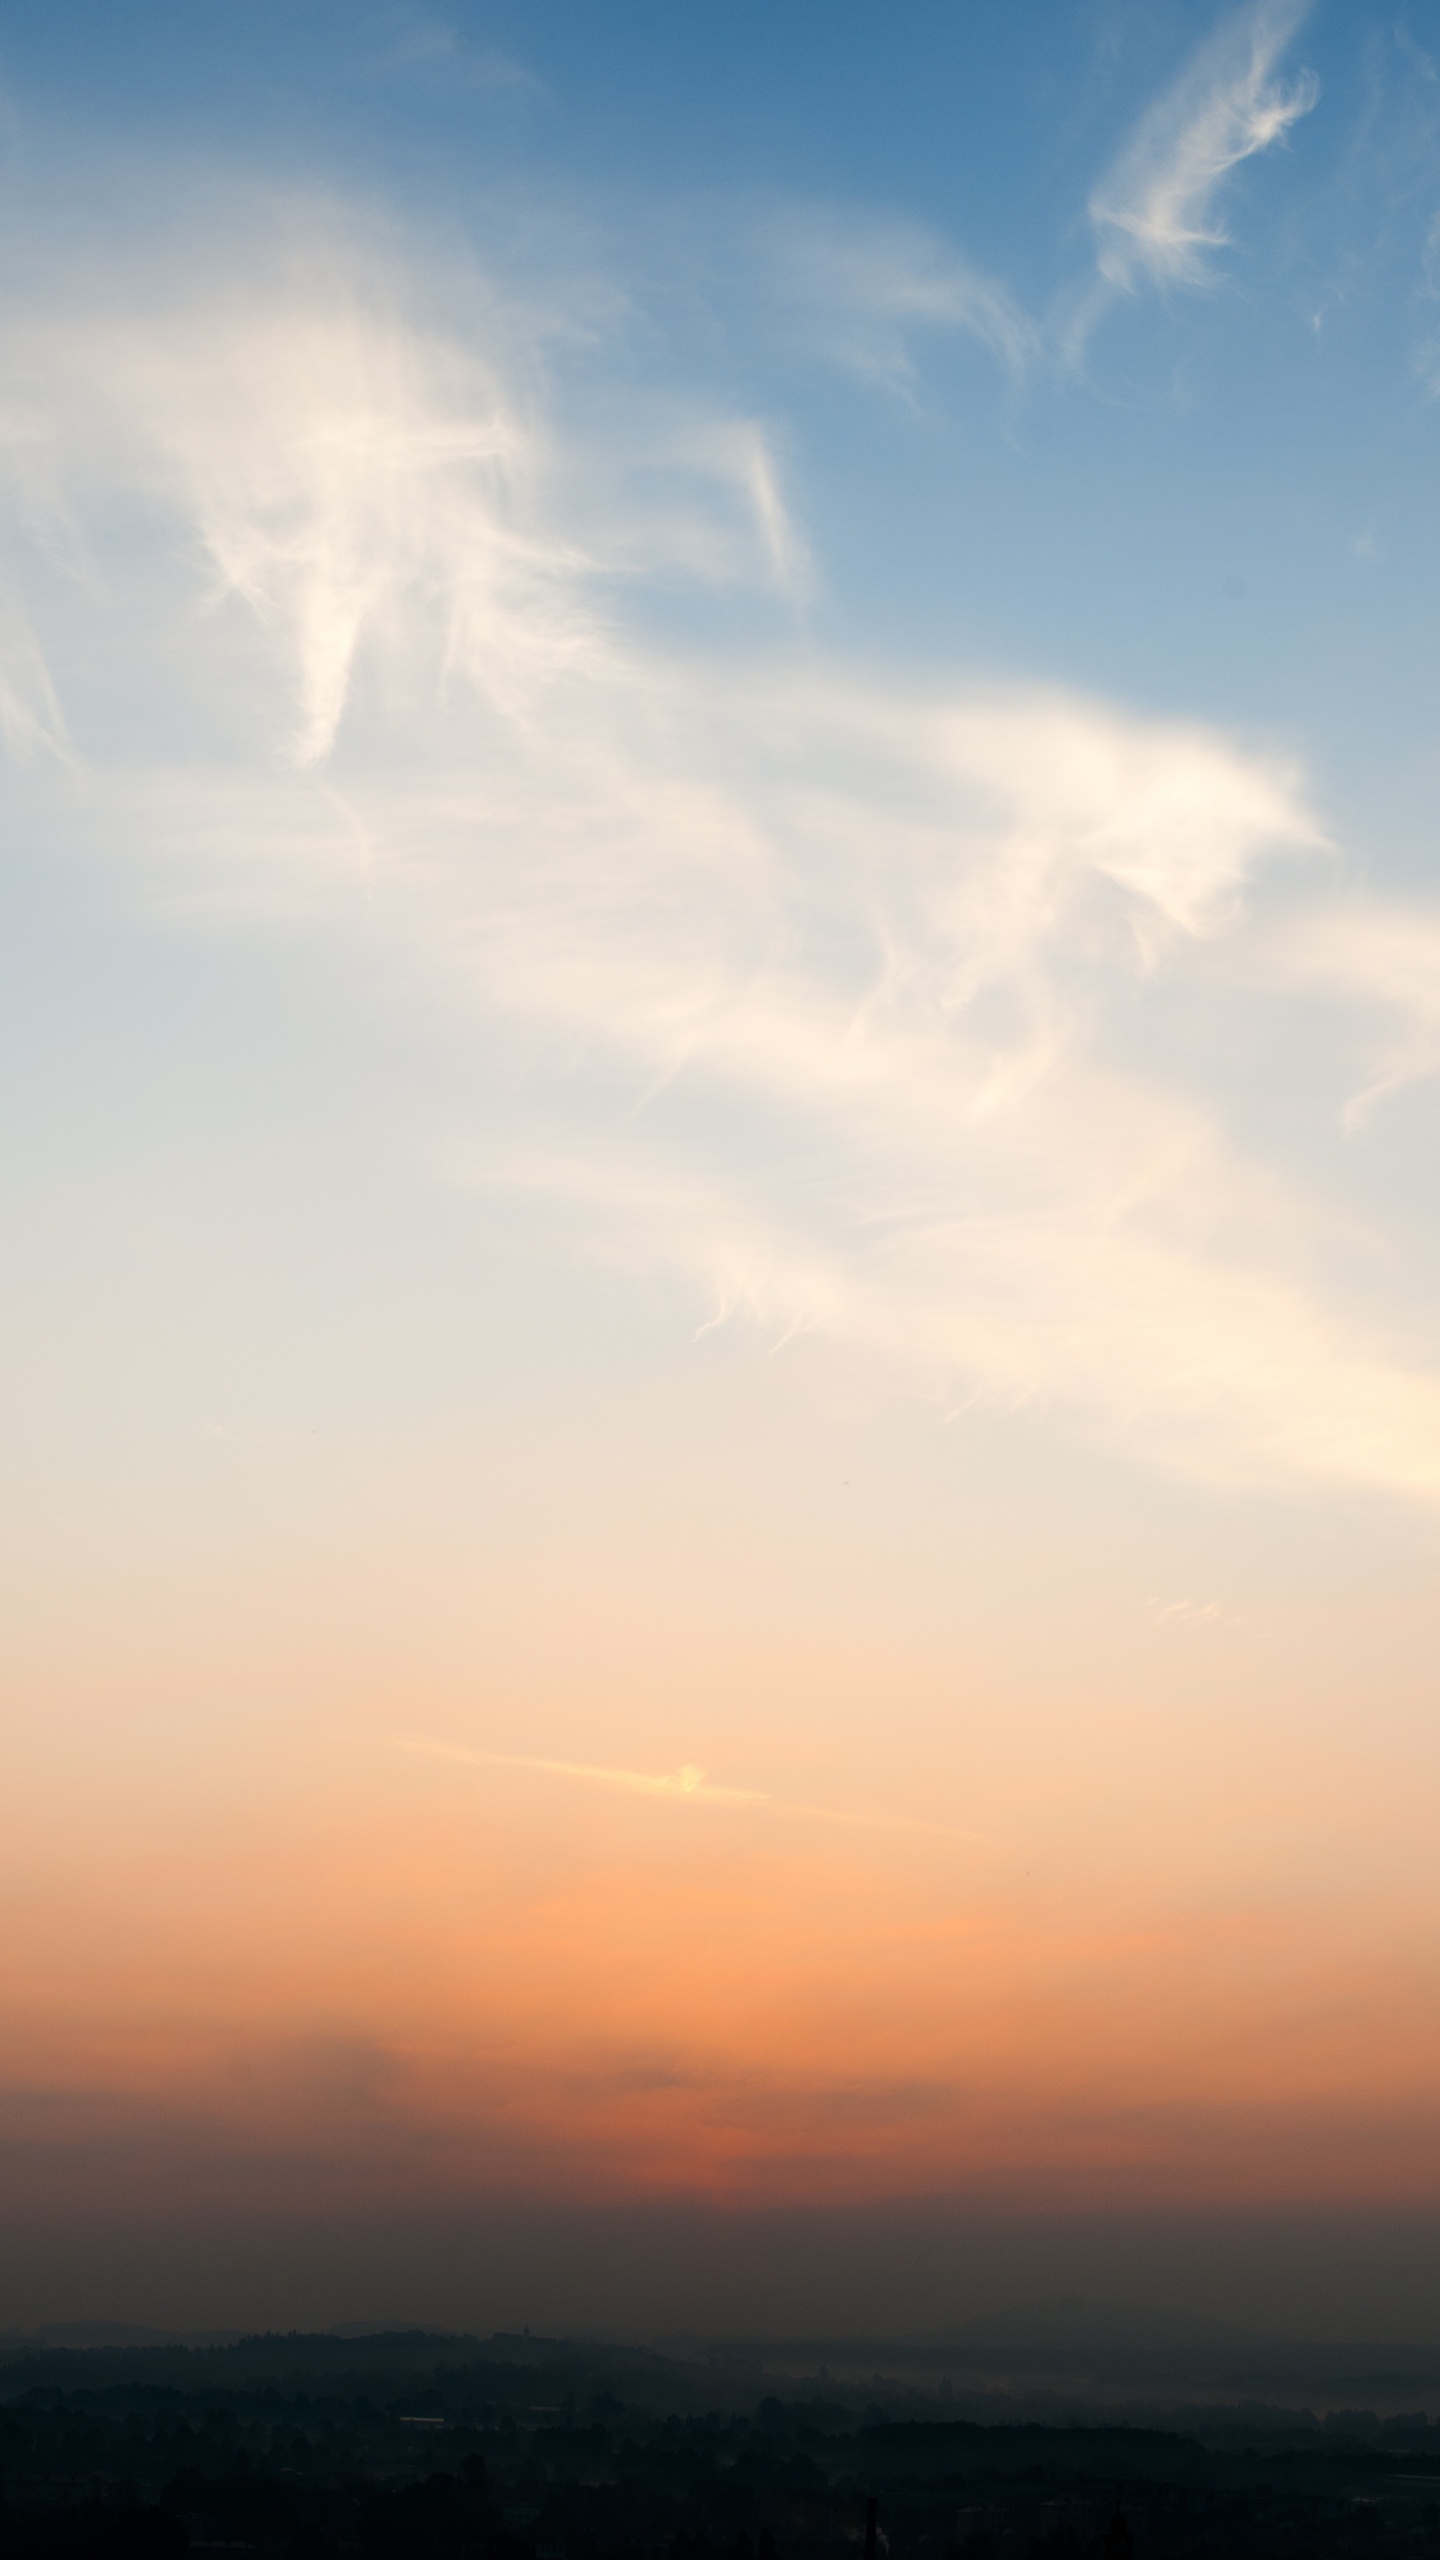 White Clouds and Blue Sky During Daytime. Wallpaper in 1440x2560 Resolution